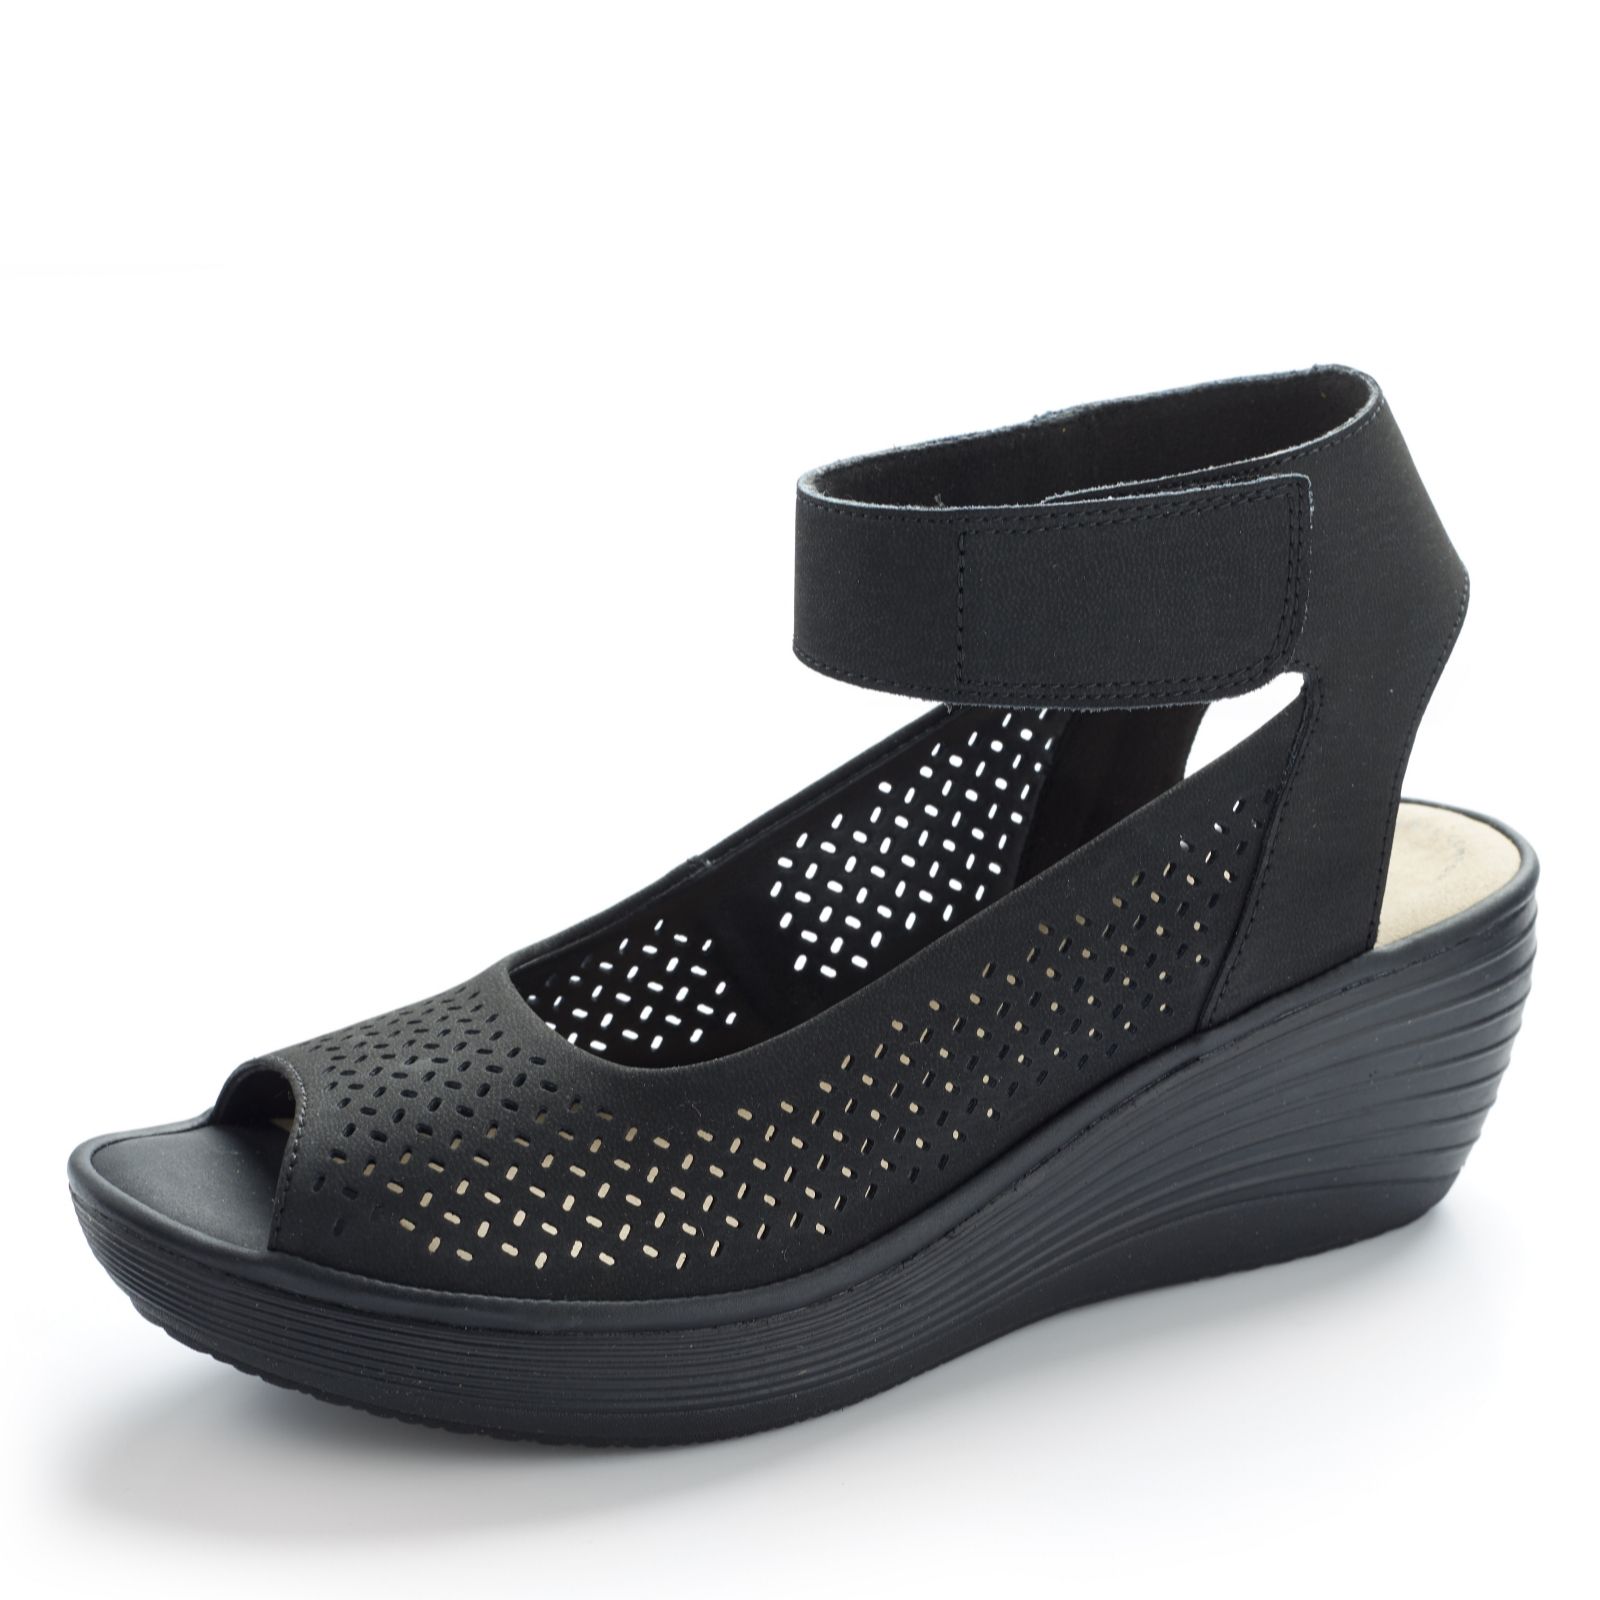 Clarks Reedly Jump Wedge Sandal - QVC UK